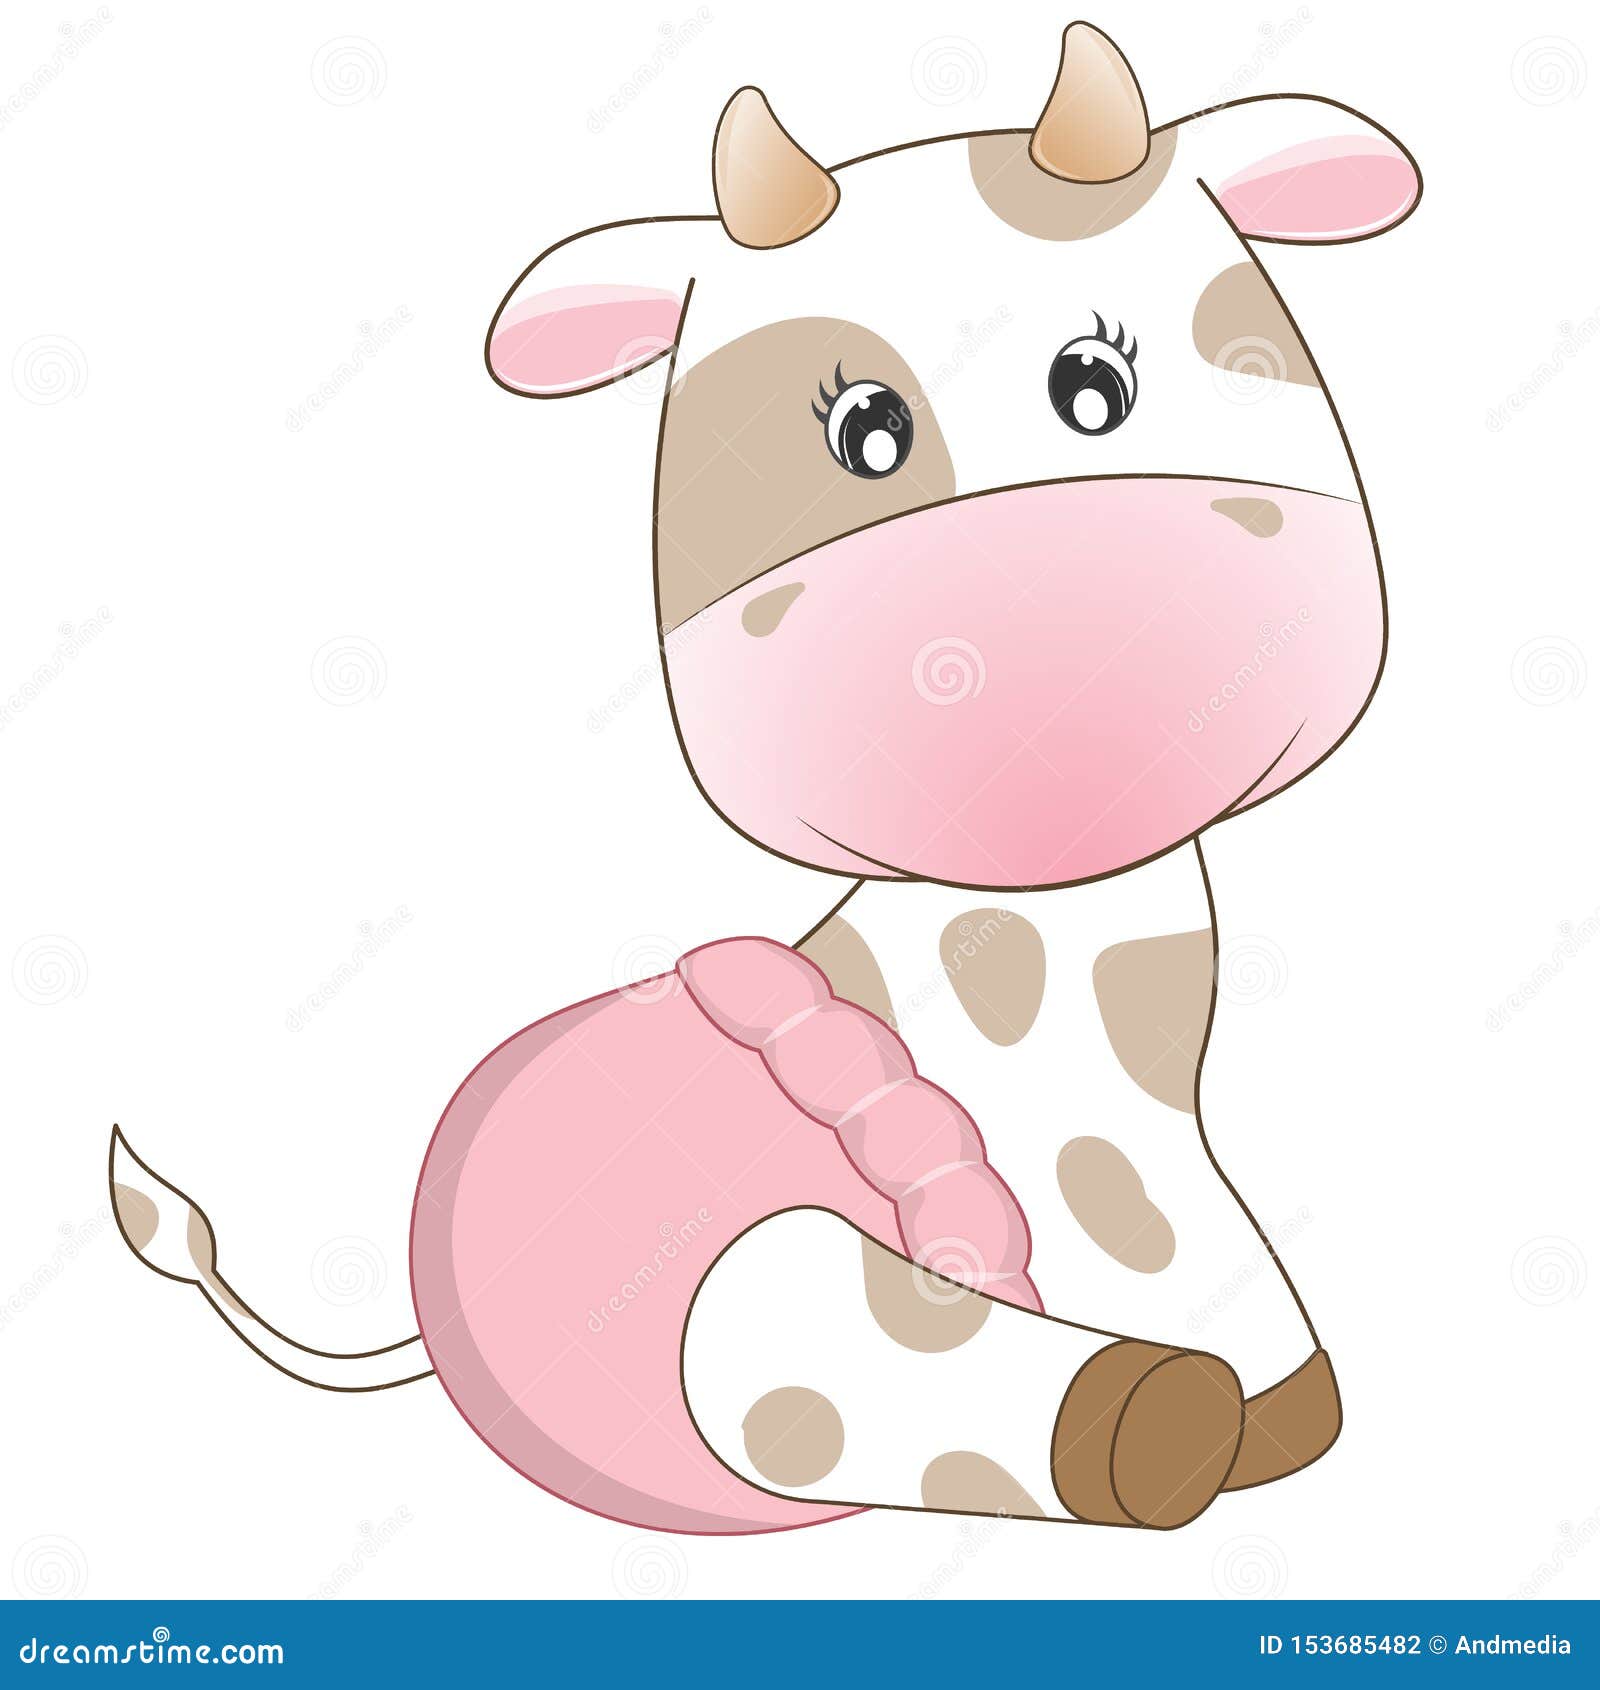 Download Adorable Baby Cow In A Diaper Cute Smiling. Stock Vector ...